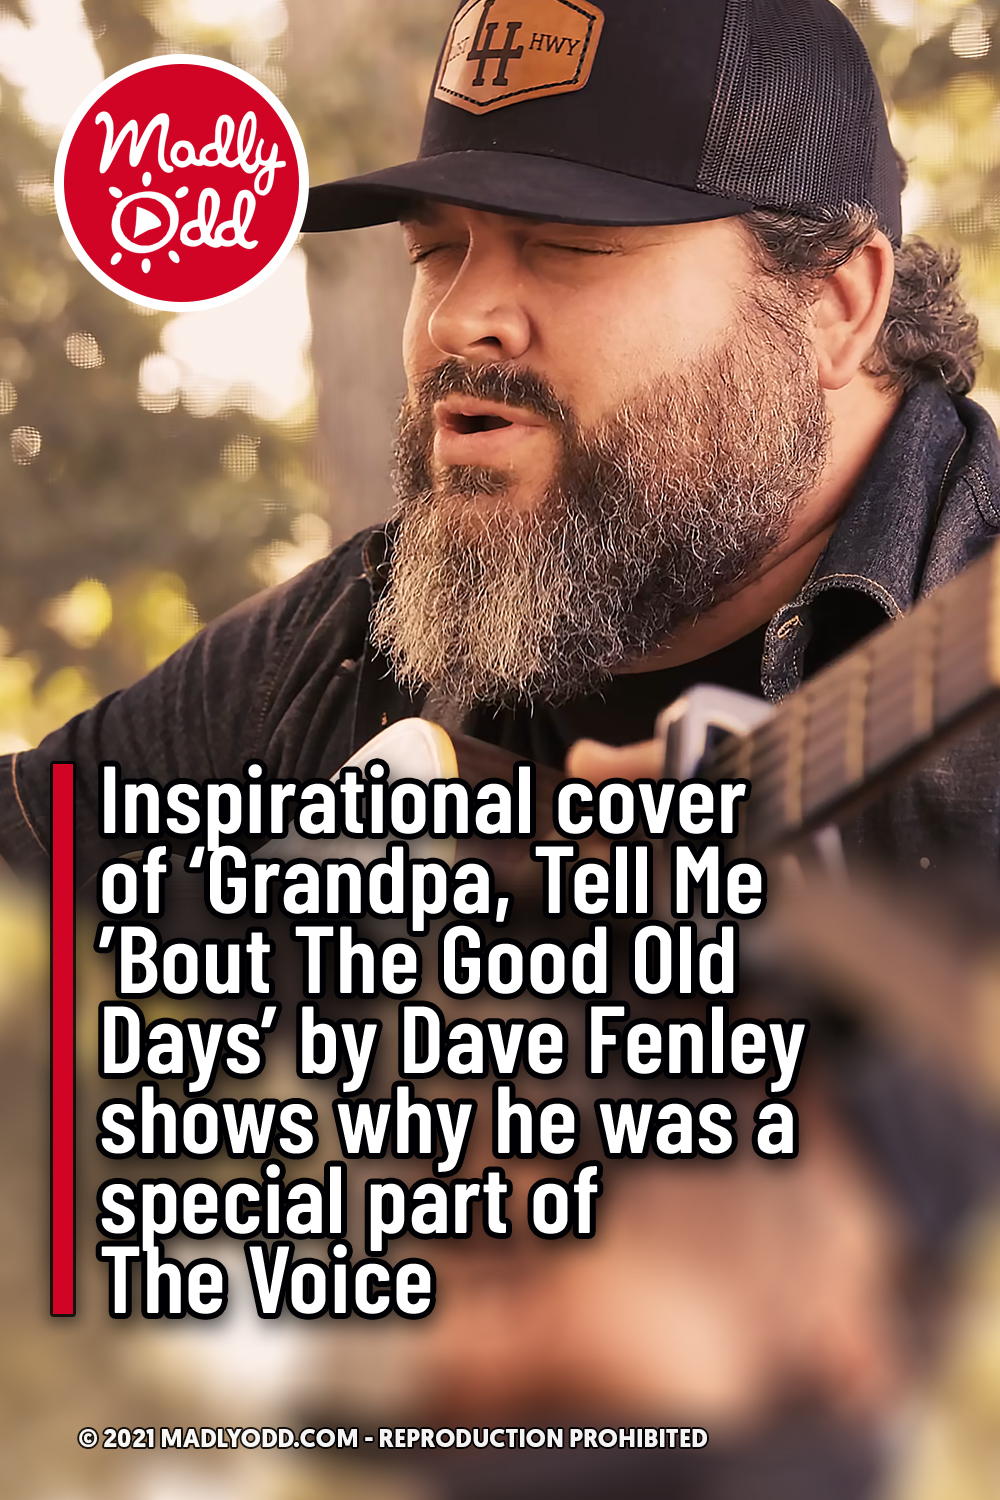 Inspirational cover of ‘Grandpa, Tell Me ’Bout The Good Old Days’ by Dave Fenley shows why he was a special part of The Voice